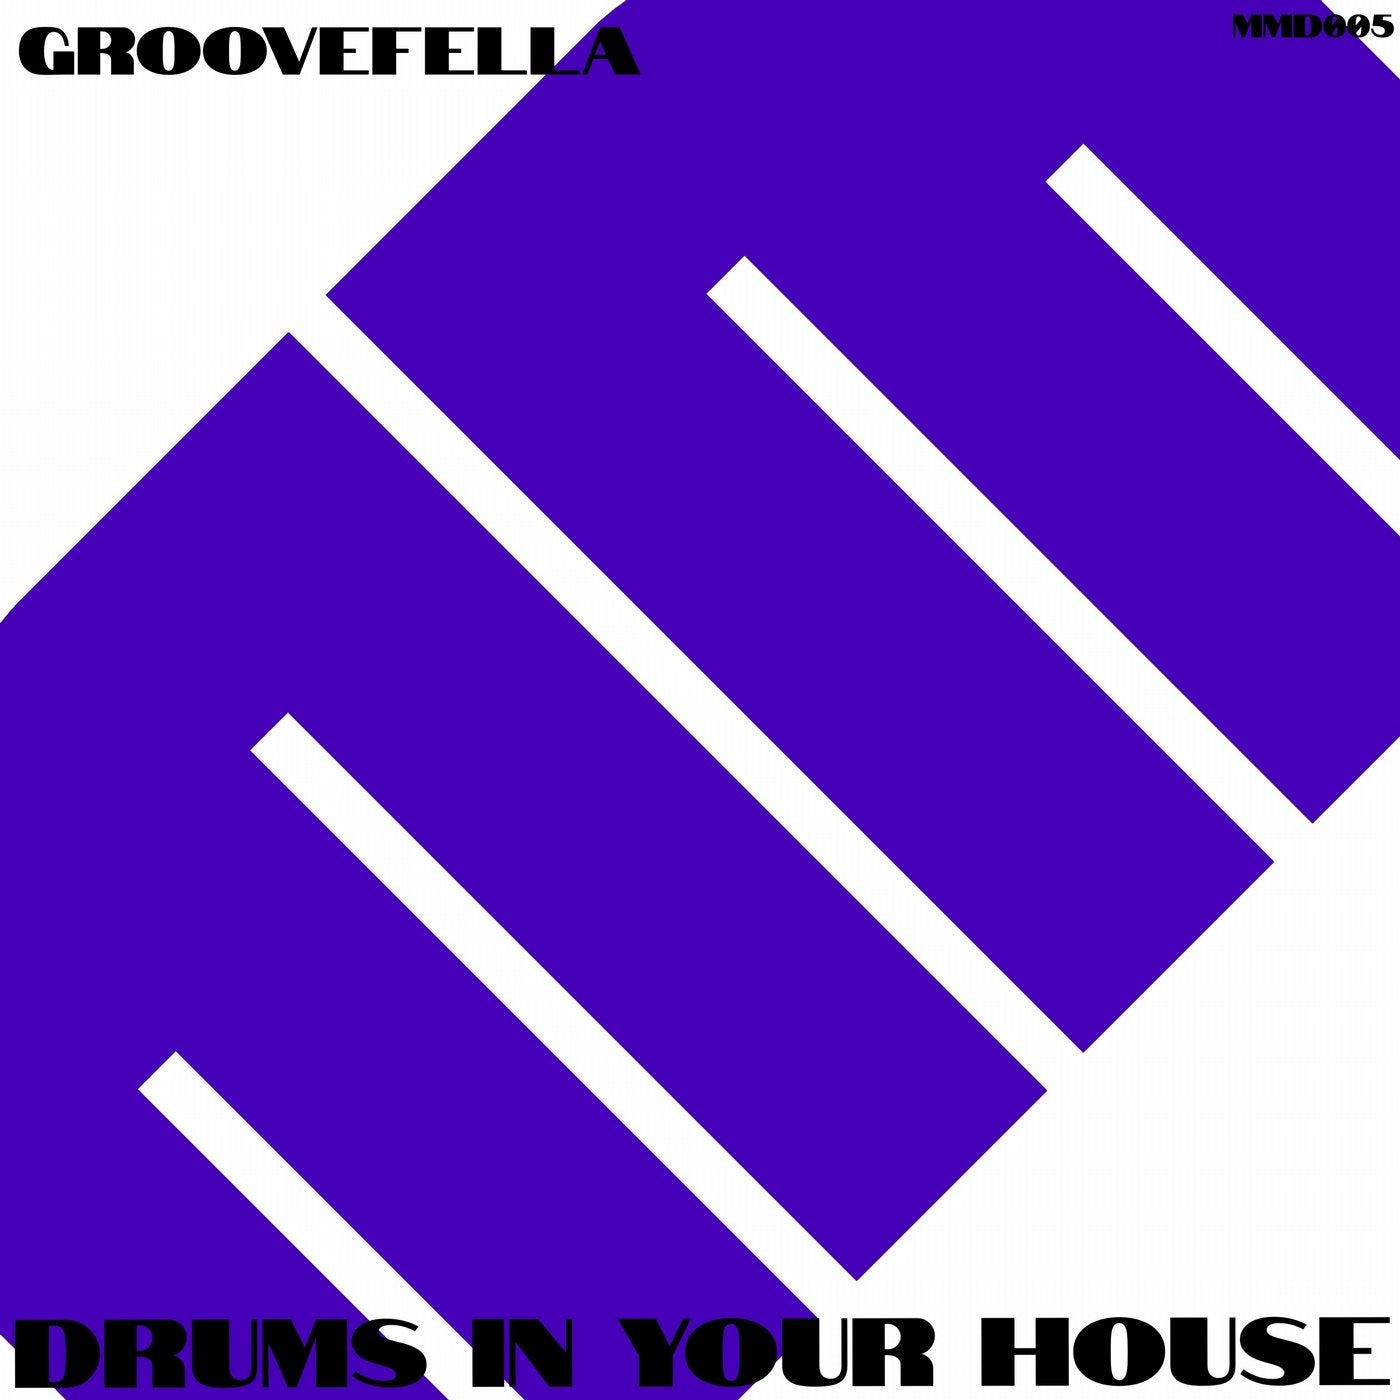 Drums in Your House